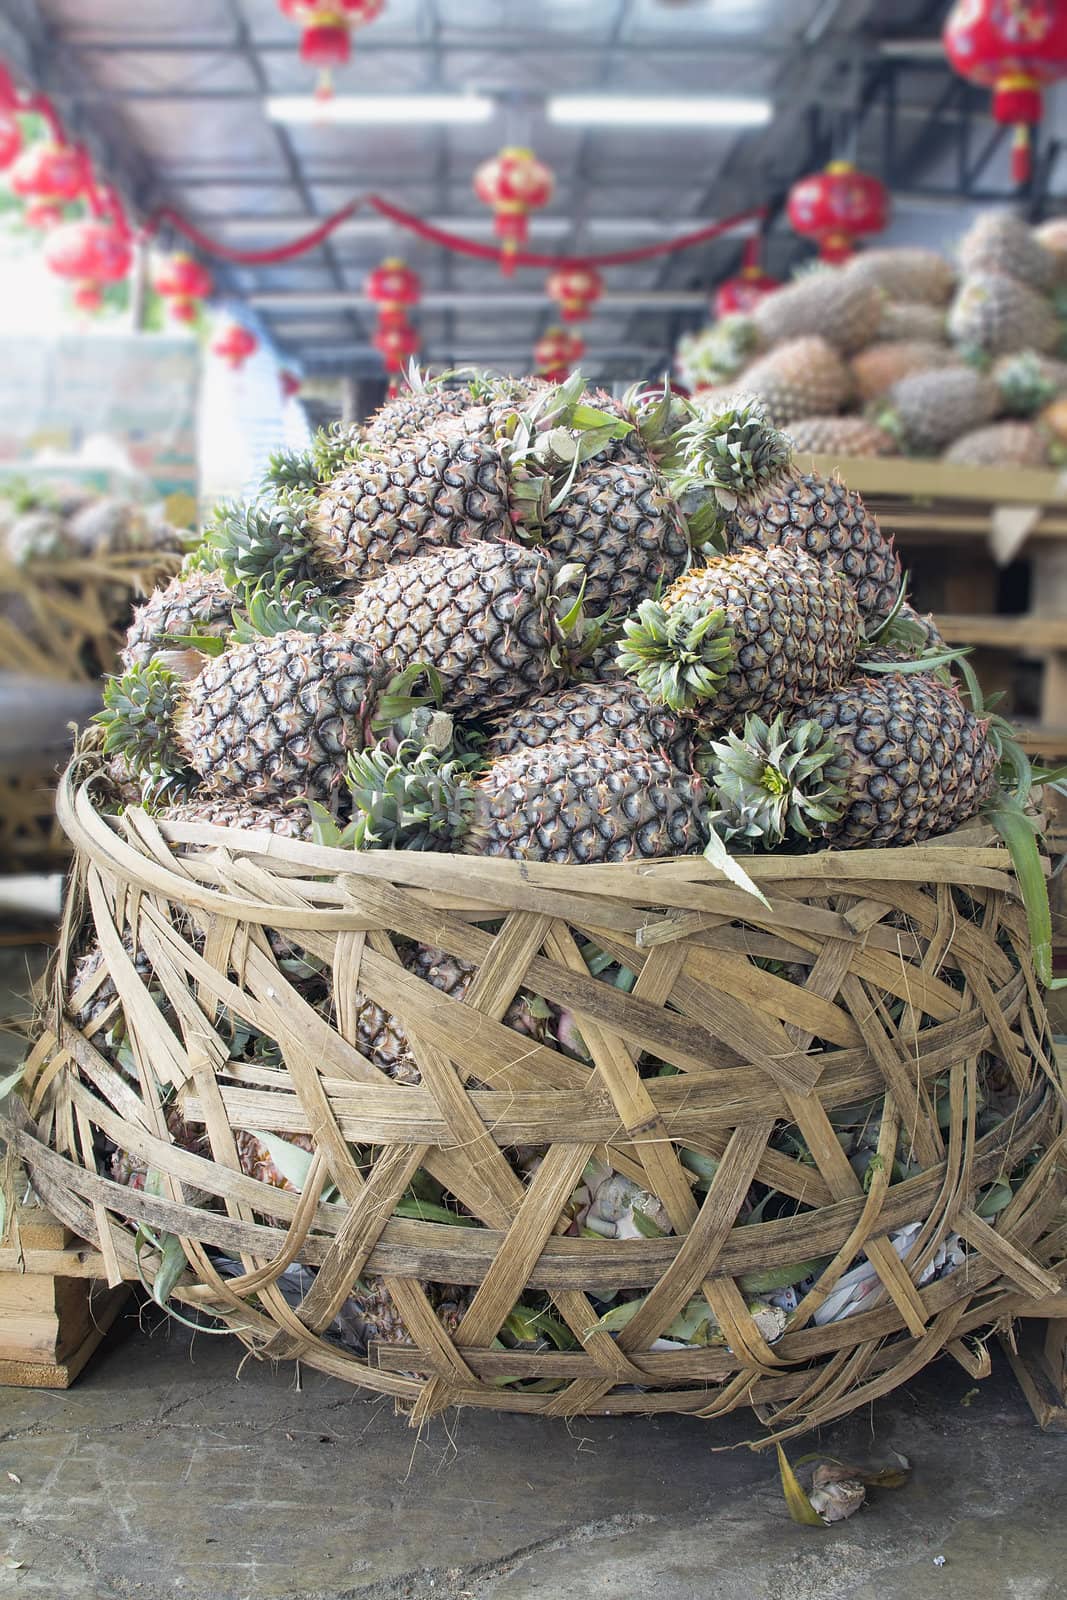 Pile of Pineapples in Big Woven Basket in Southeast Asian Fruits and Vegetables Market